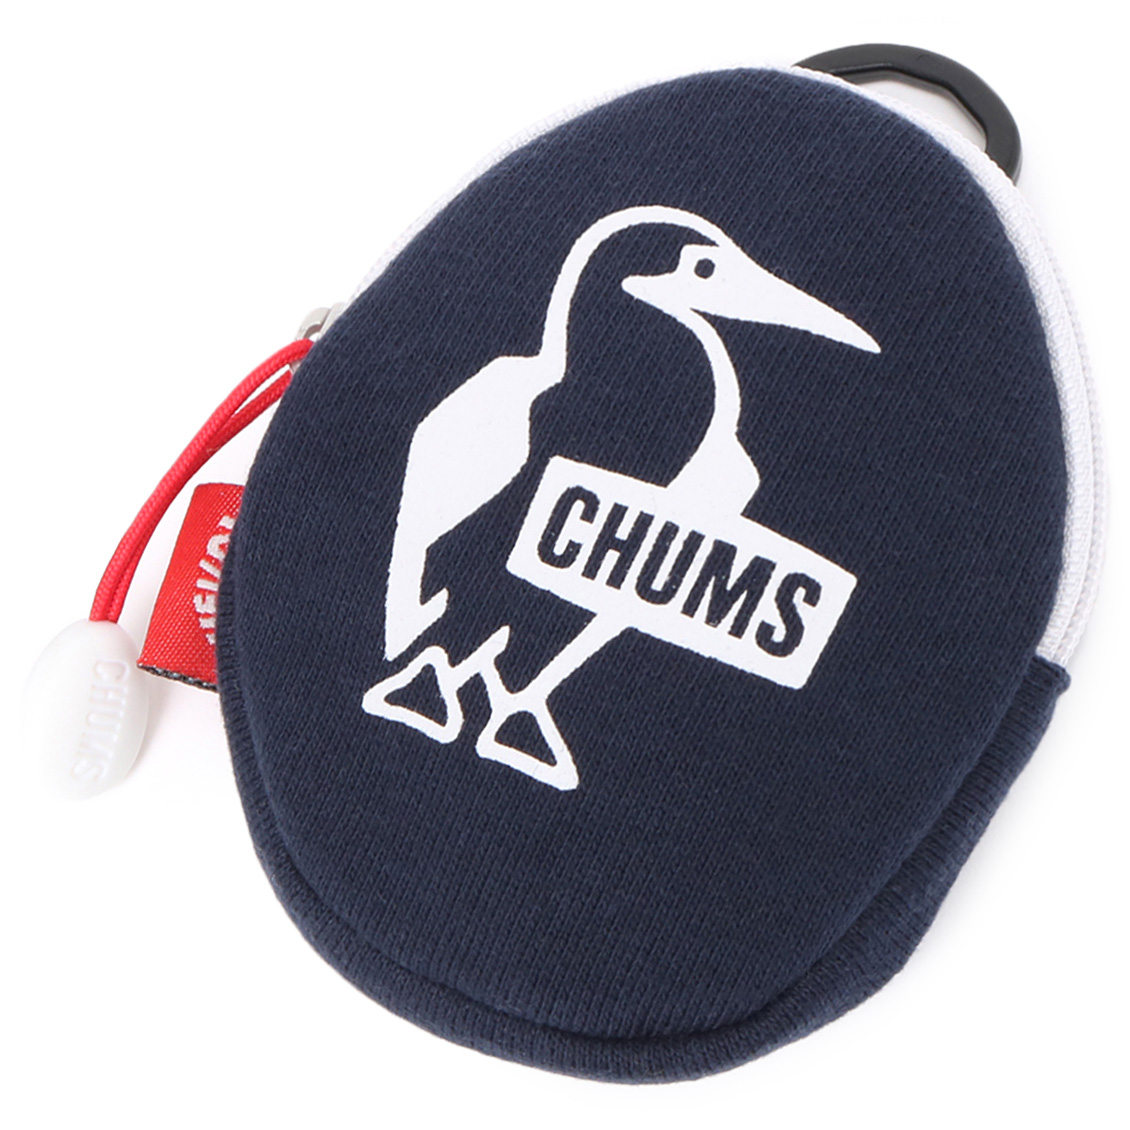 CHUMS チャムス 財布 Egg Coin Case Sweat エッグ コインケース スウェット